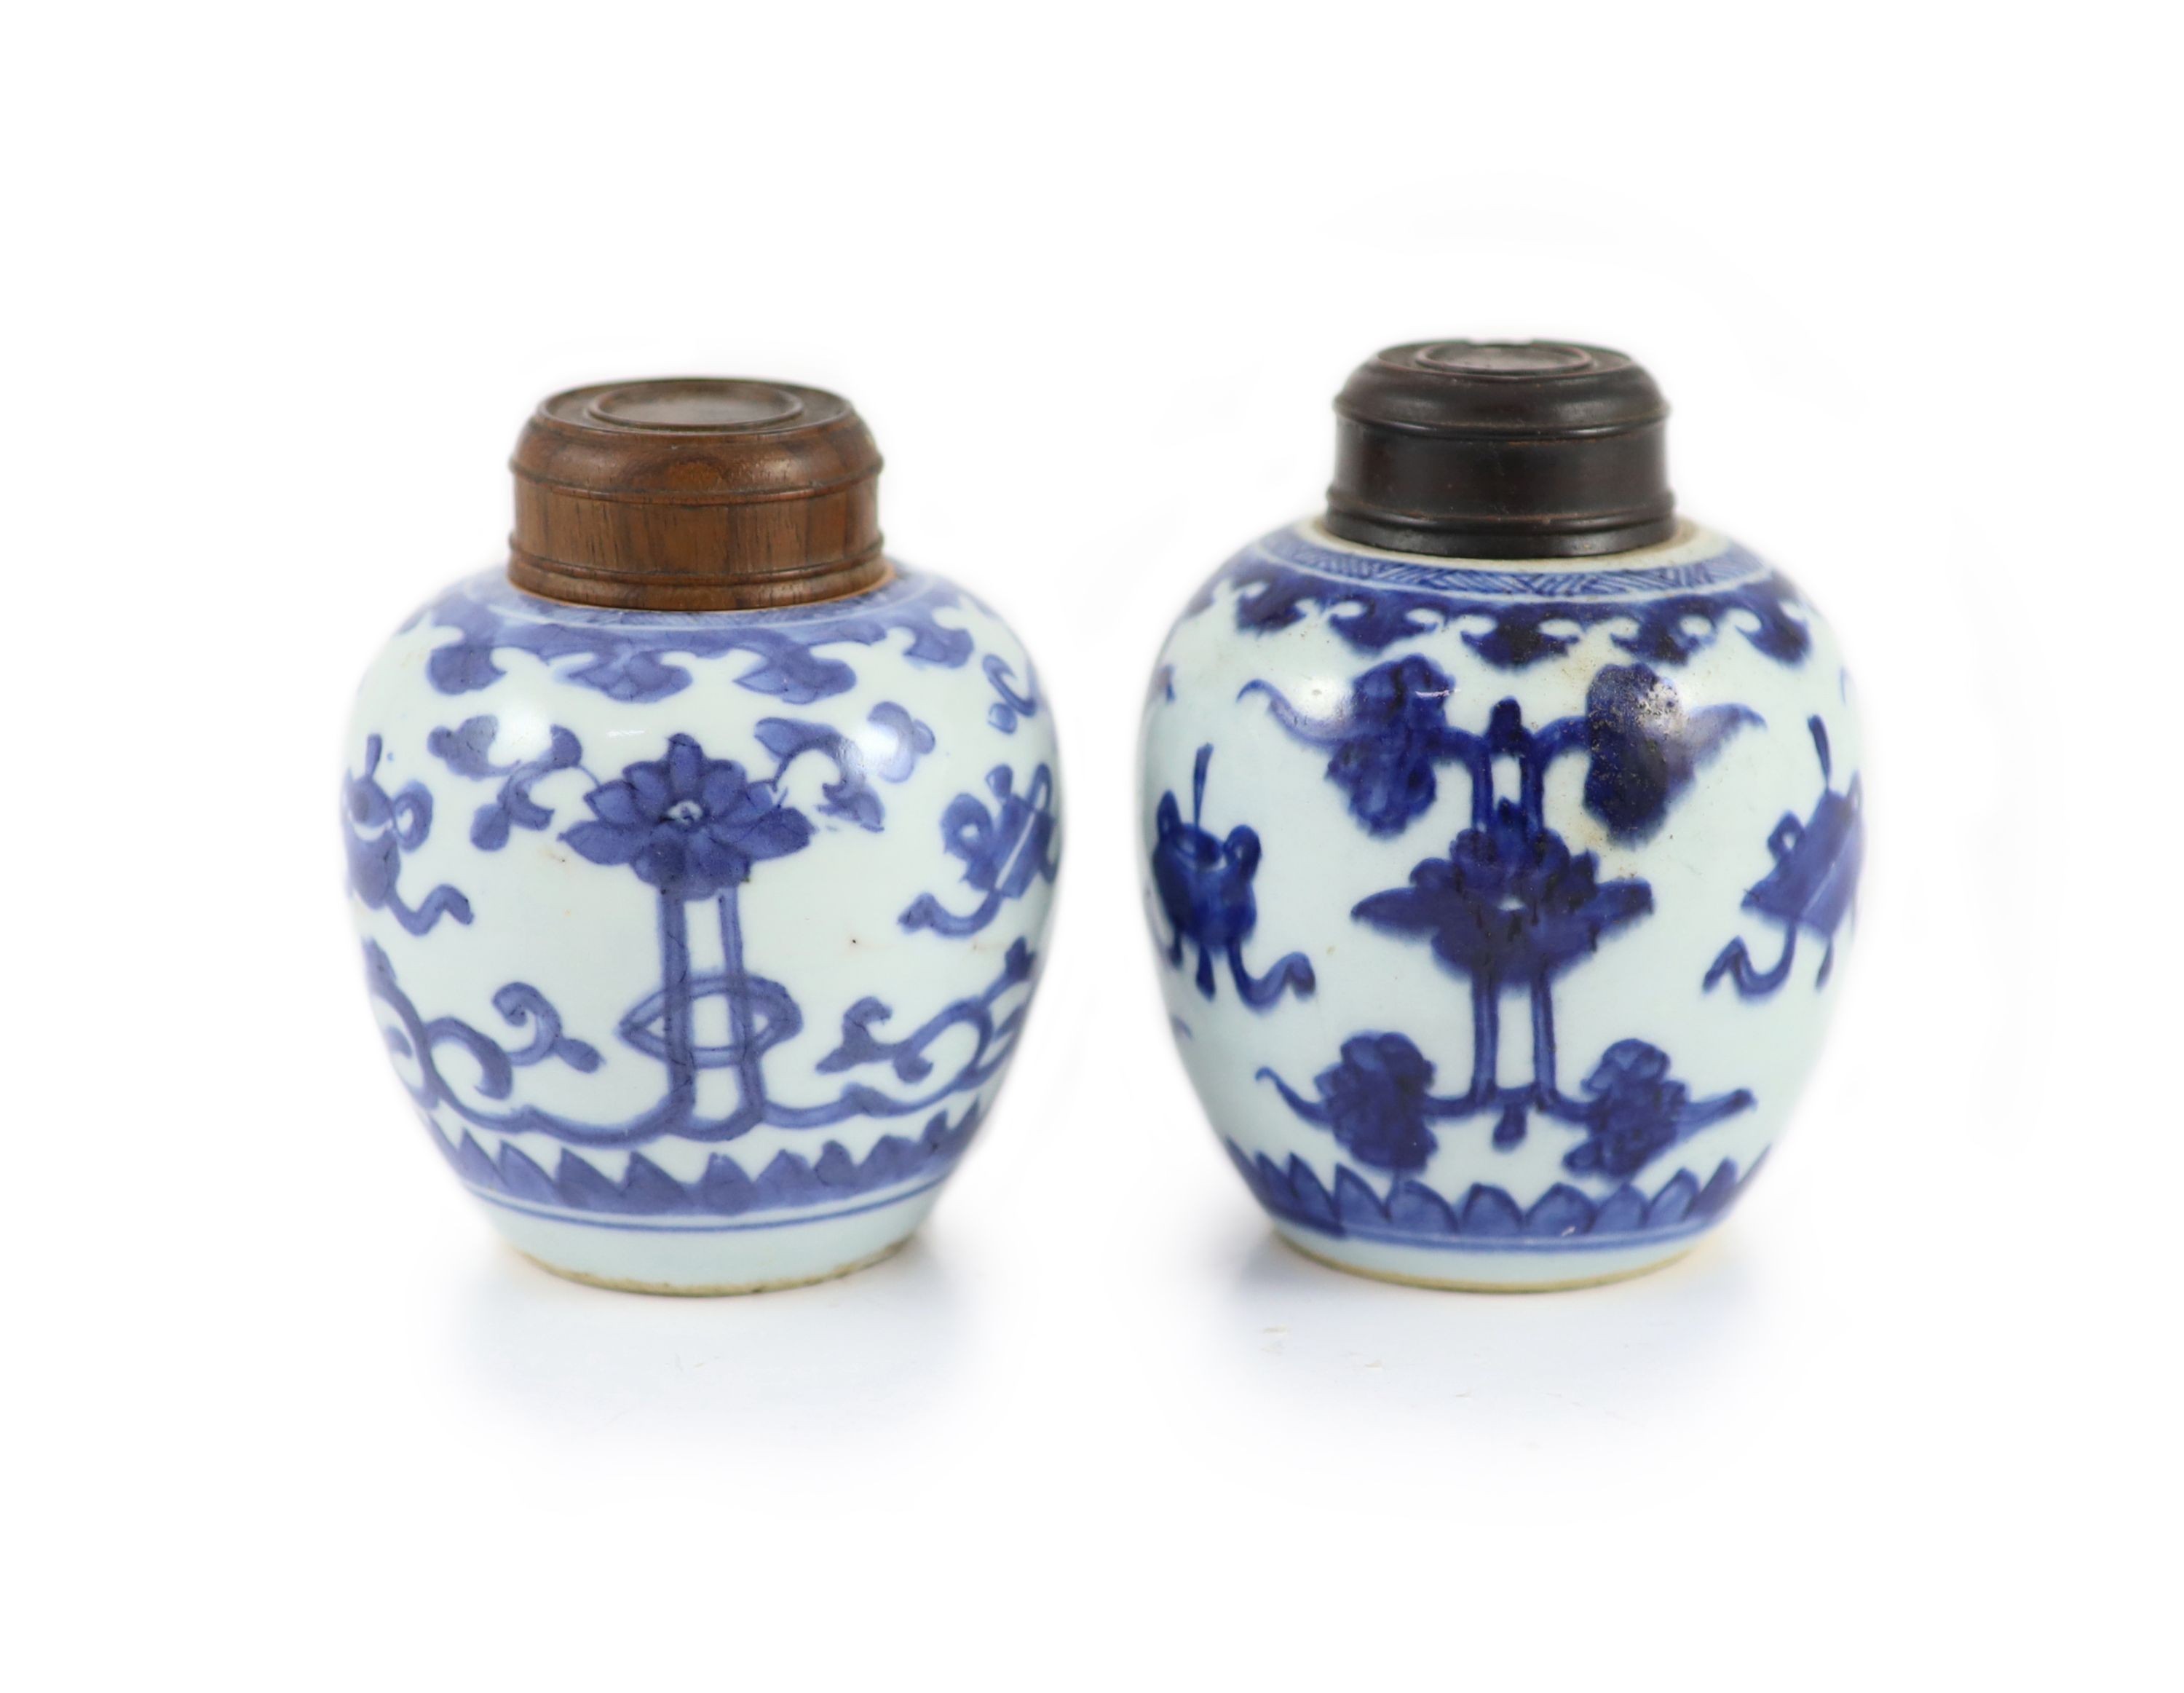 A near pair of Chinese blue and white ovoid jars, Kangxi period, 10 cm high, wood covers                                                                                                                                    